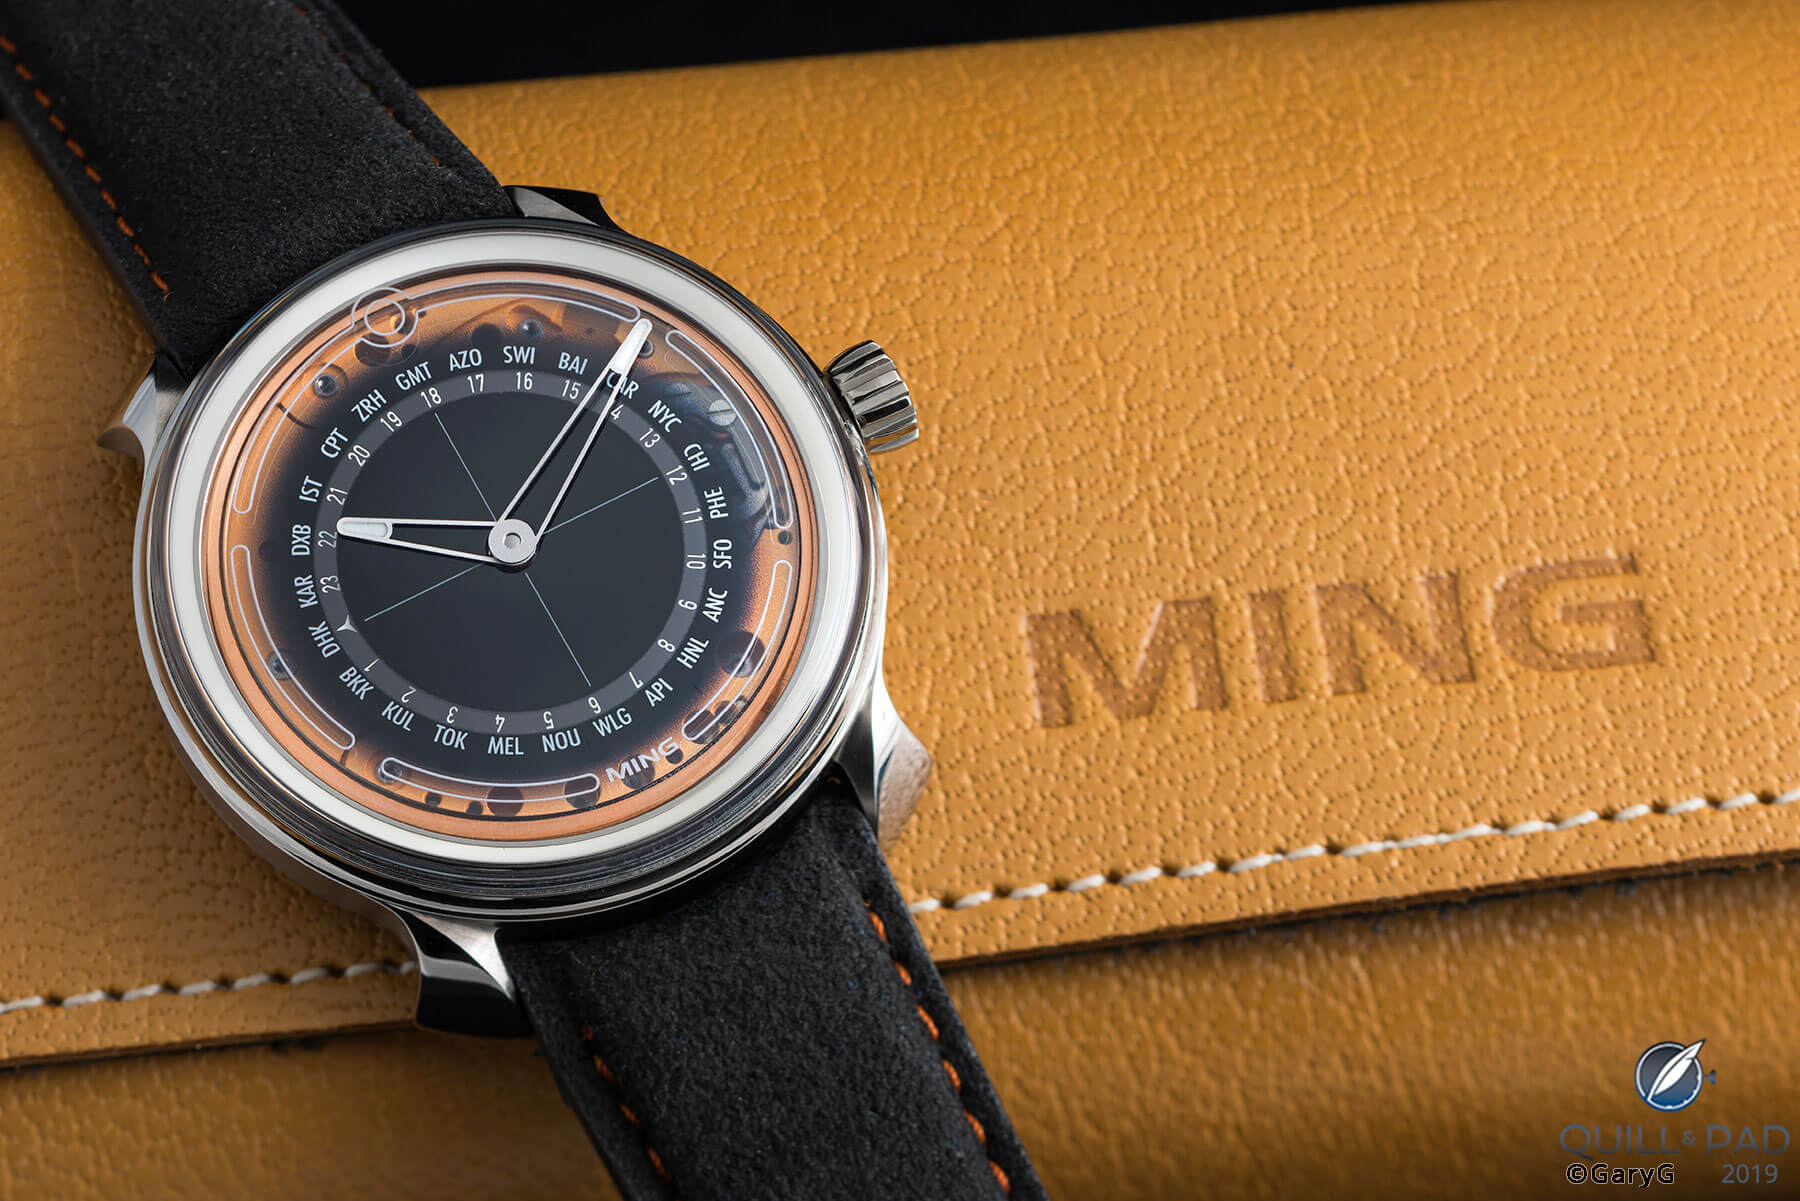 Going upmarket: Ming Model 19.02 with pre-production leather pouch (to be updated in final version)